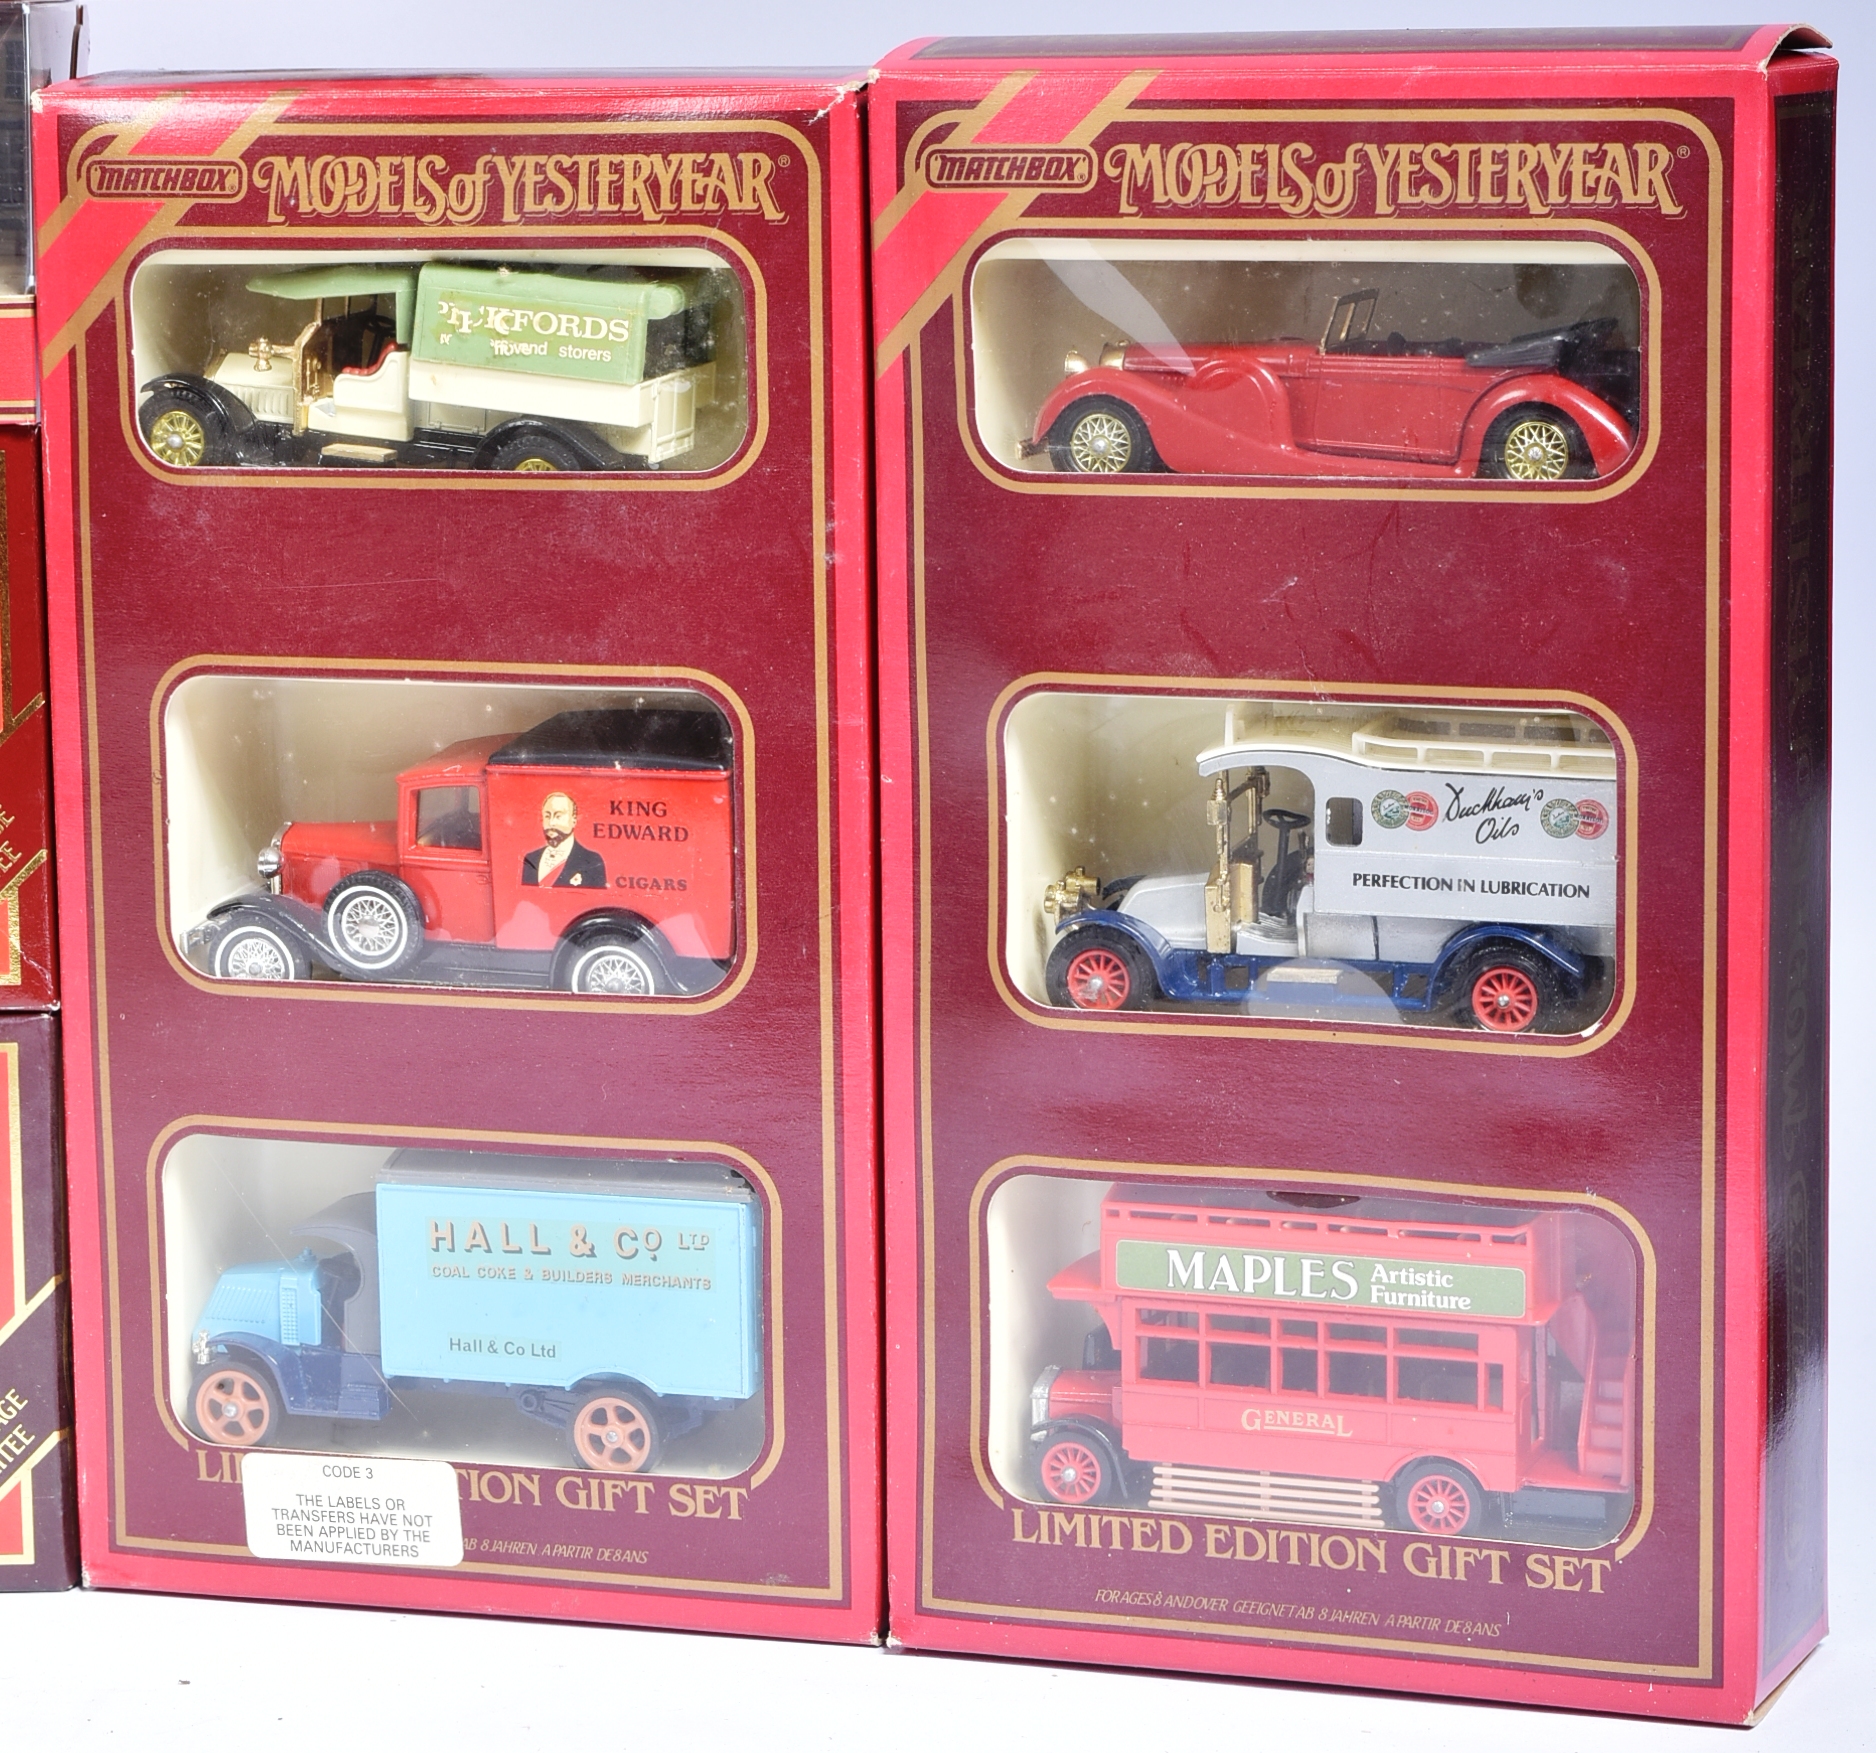 DIECAST - COLLECTION OF X14 MATCHBOX MODELS OF YESTERYEAR DIECAST - Image 6 of 6